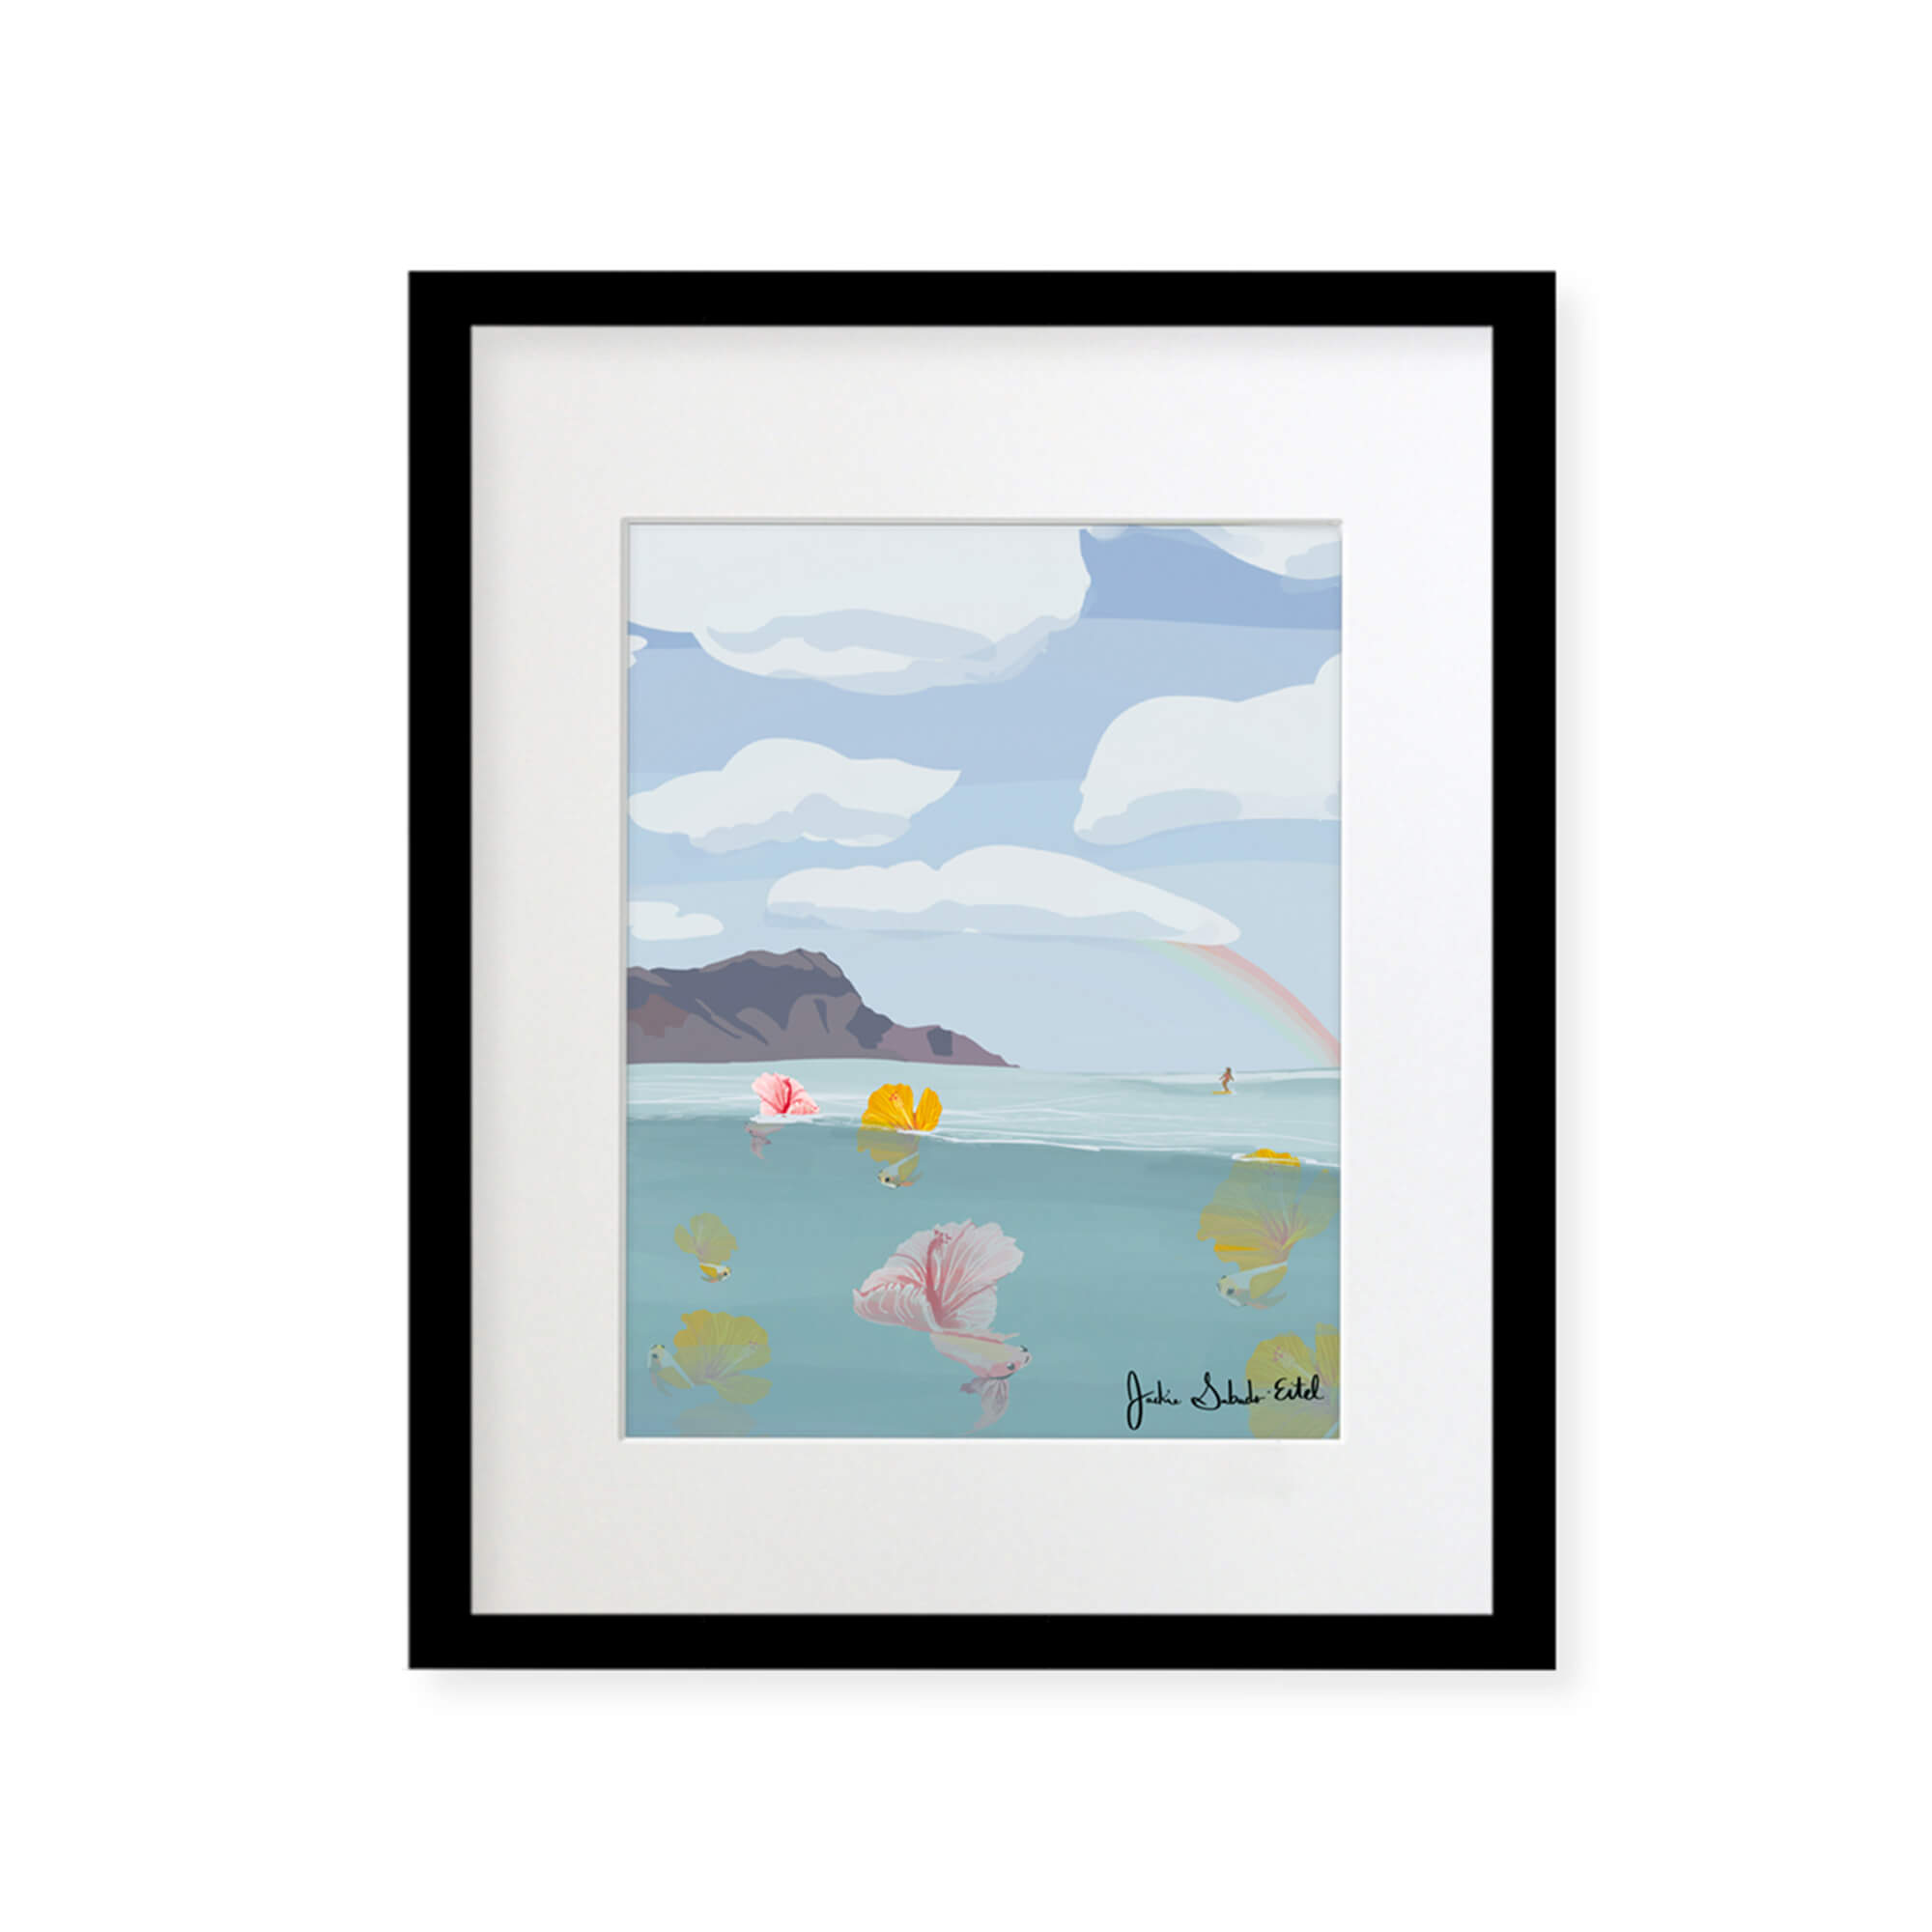 A framed matted art print featuring colorful tropical fish with hibiscus flowers as their tails, the Diamond Head in the background with a woman surfing by Hawaii artist Jackie Eitel